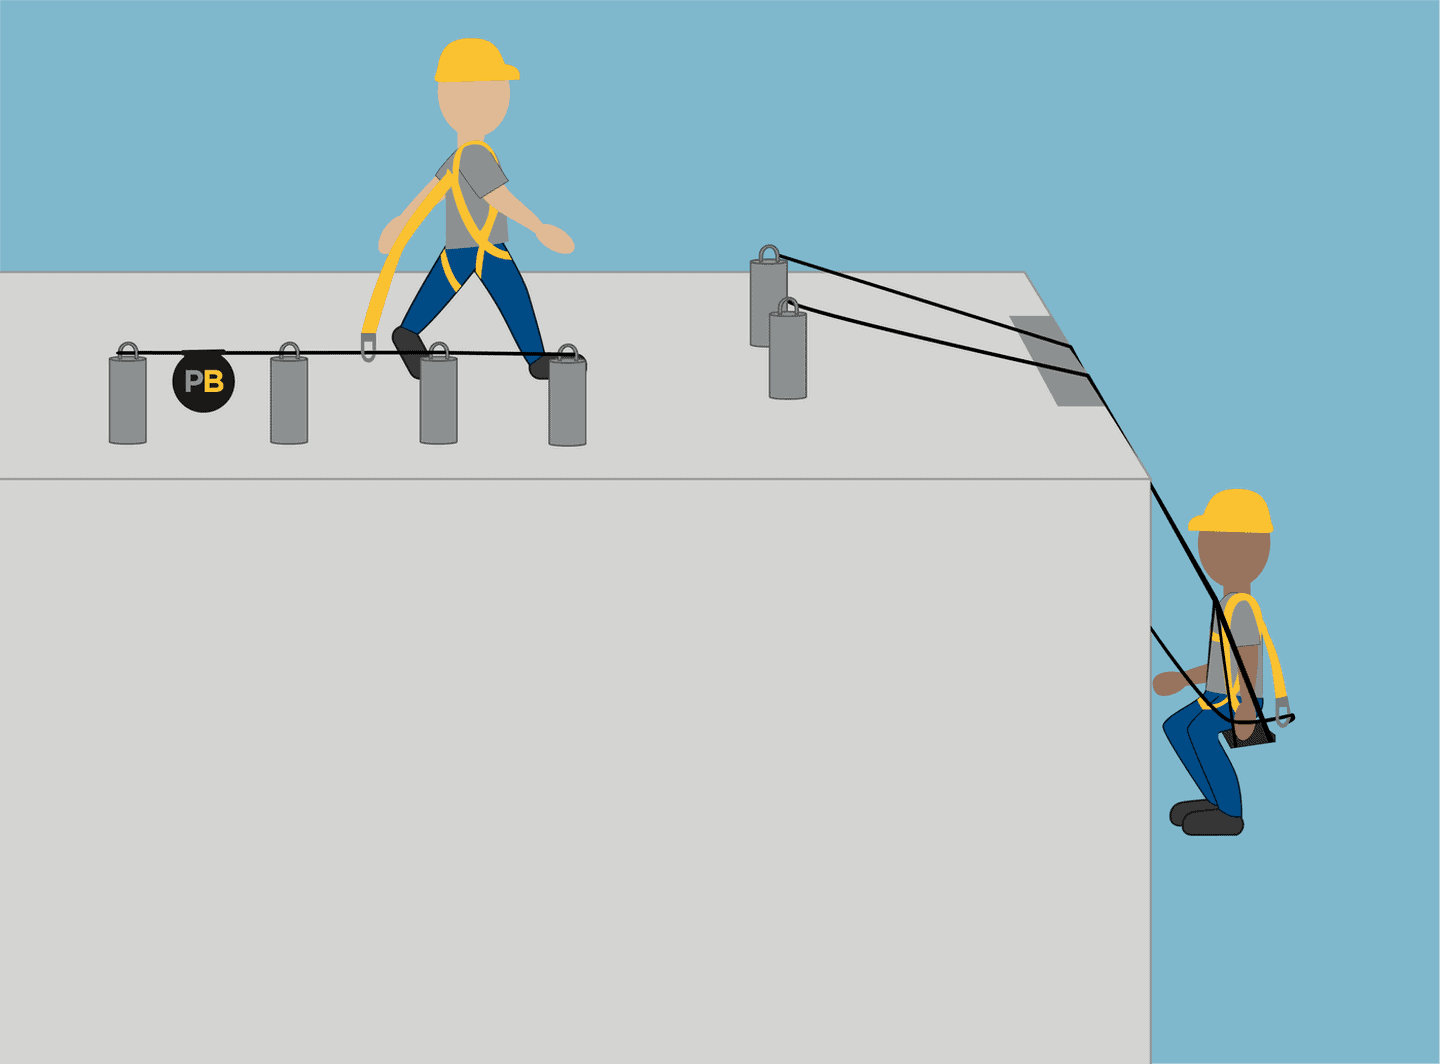 Two men demonstrating safe fall protection practices using Pro-Bel's permanent roof anchors